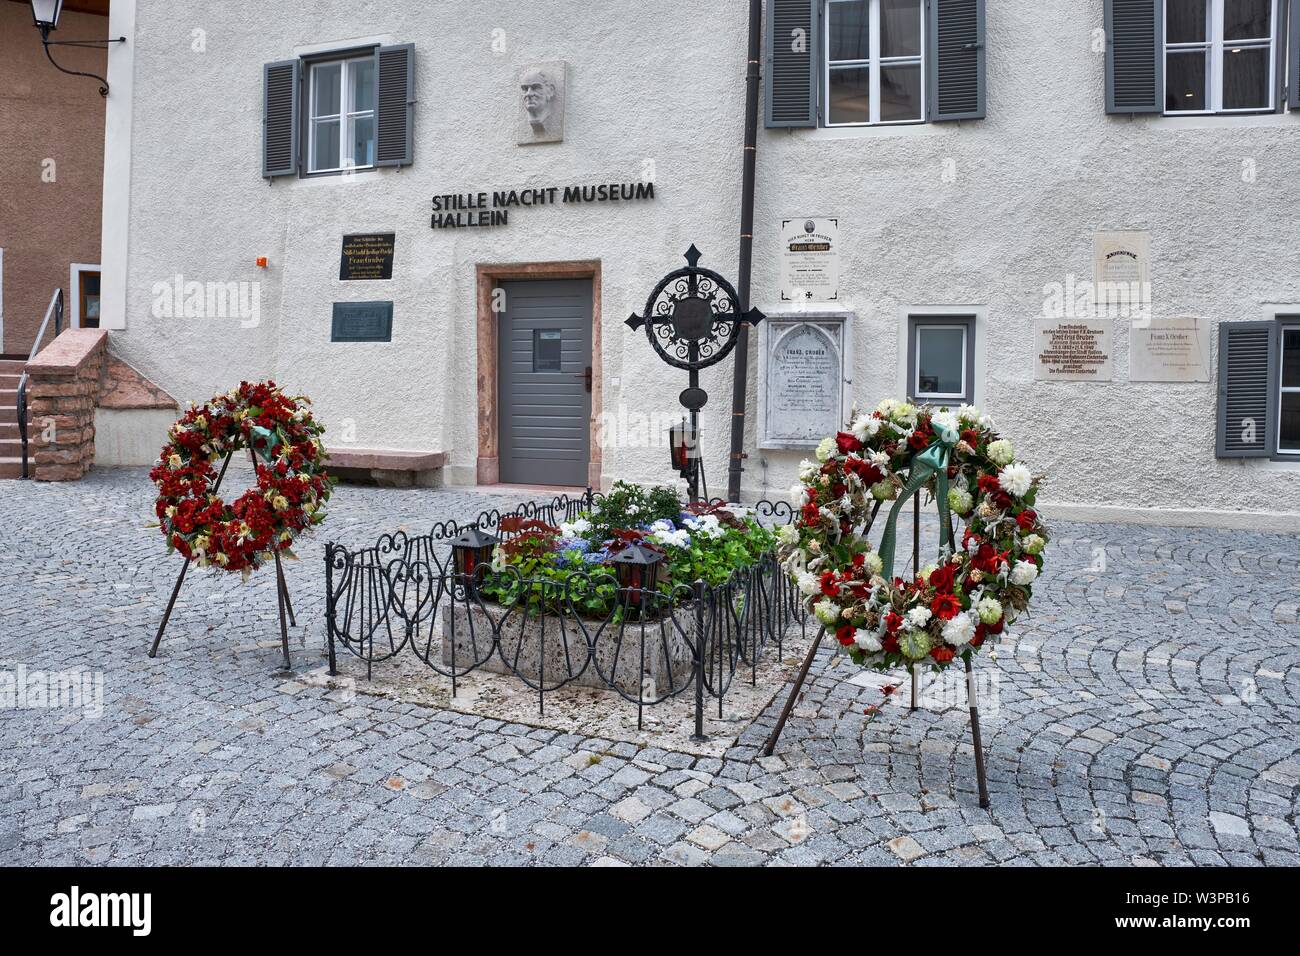 Silent Night Museum with tomb of Franz Xaver Gruber in the old town of Hallein, Austria Stock Photo